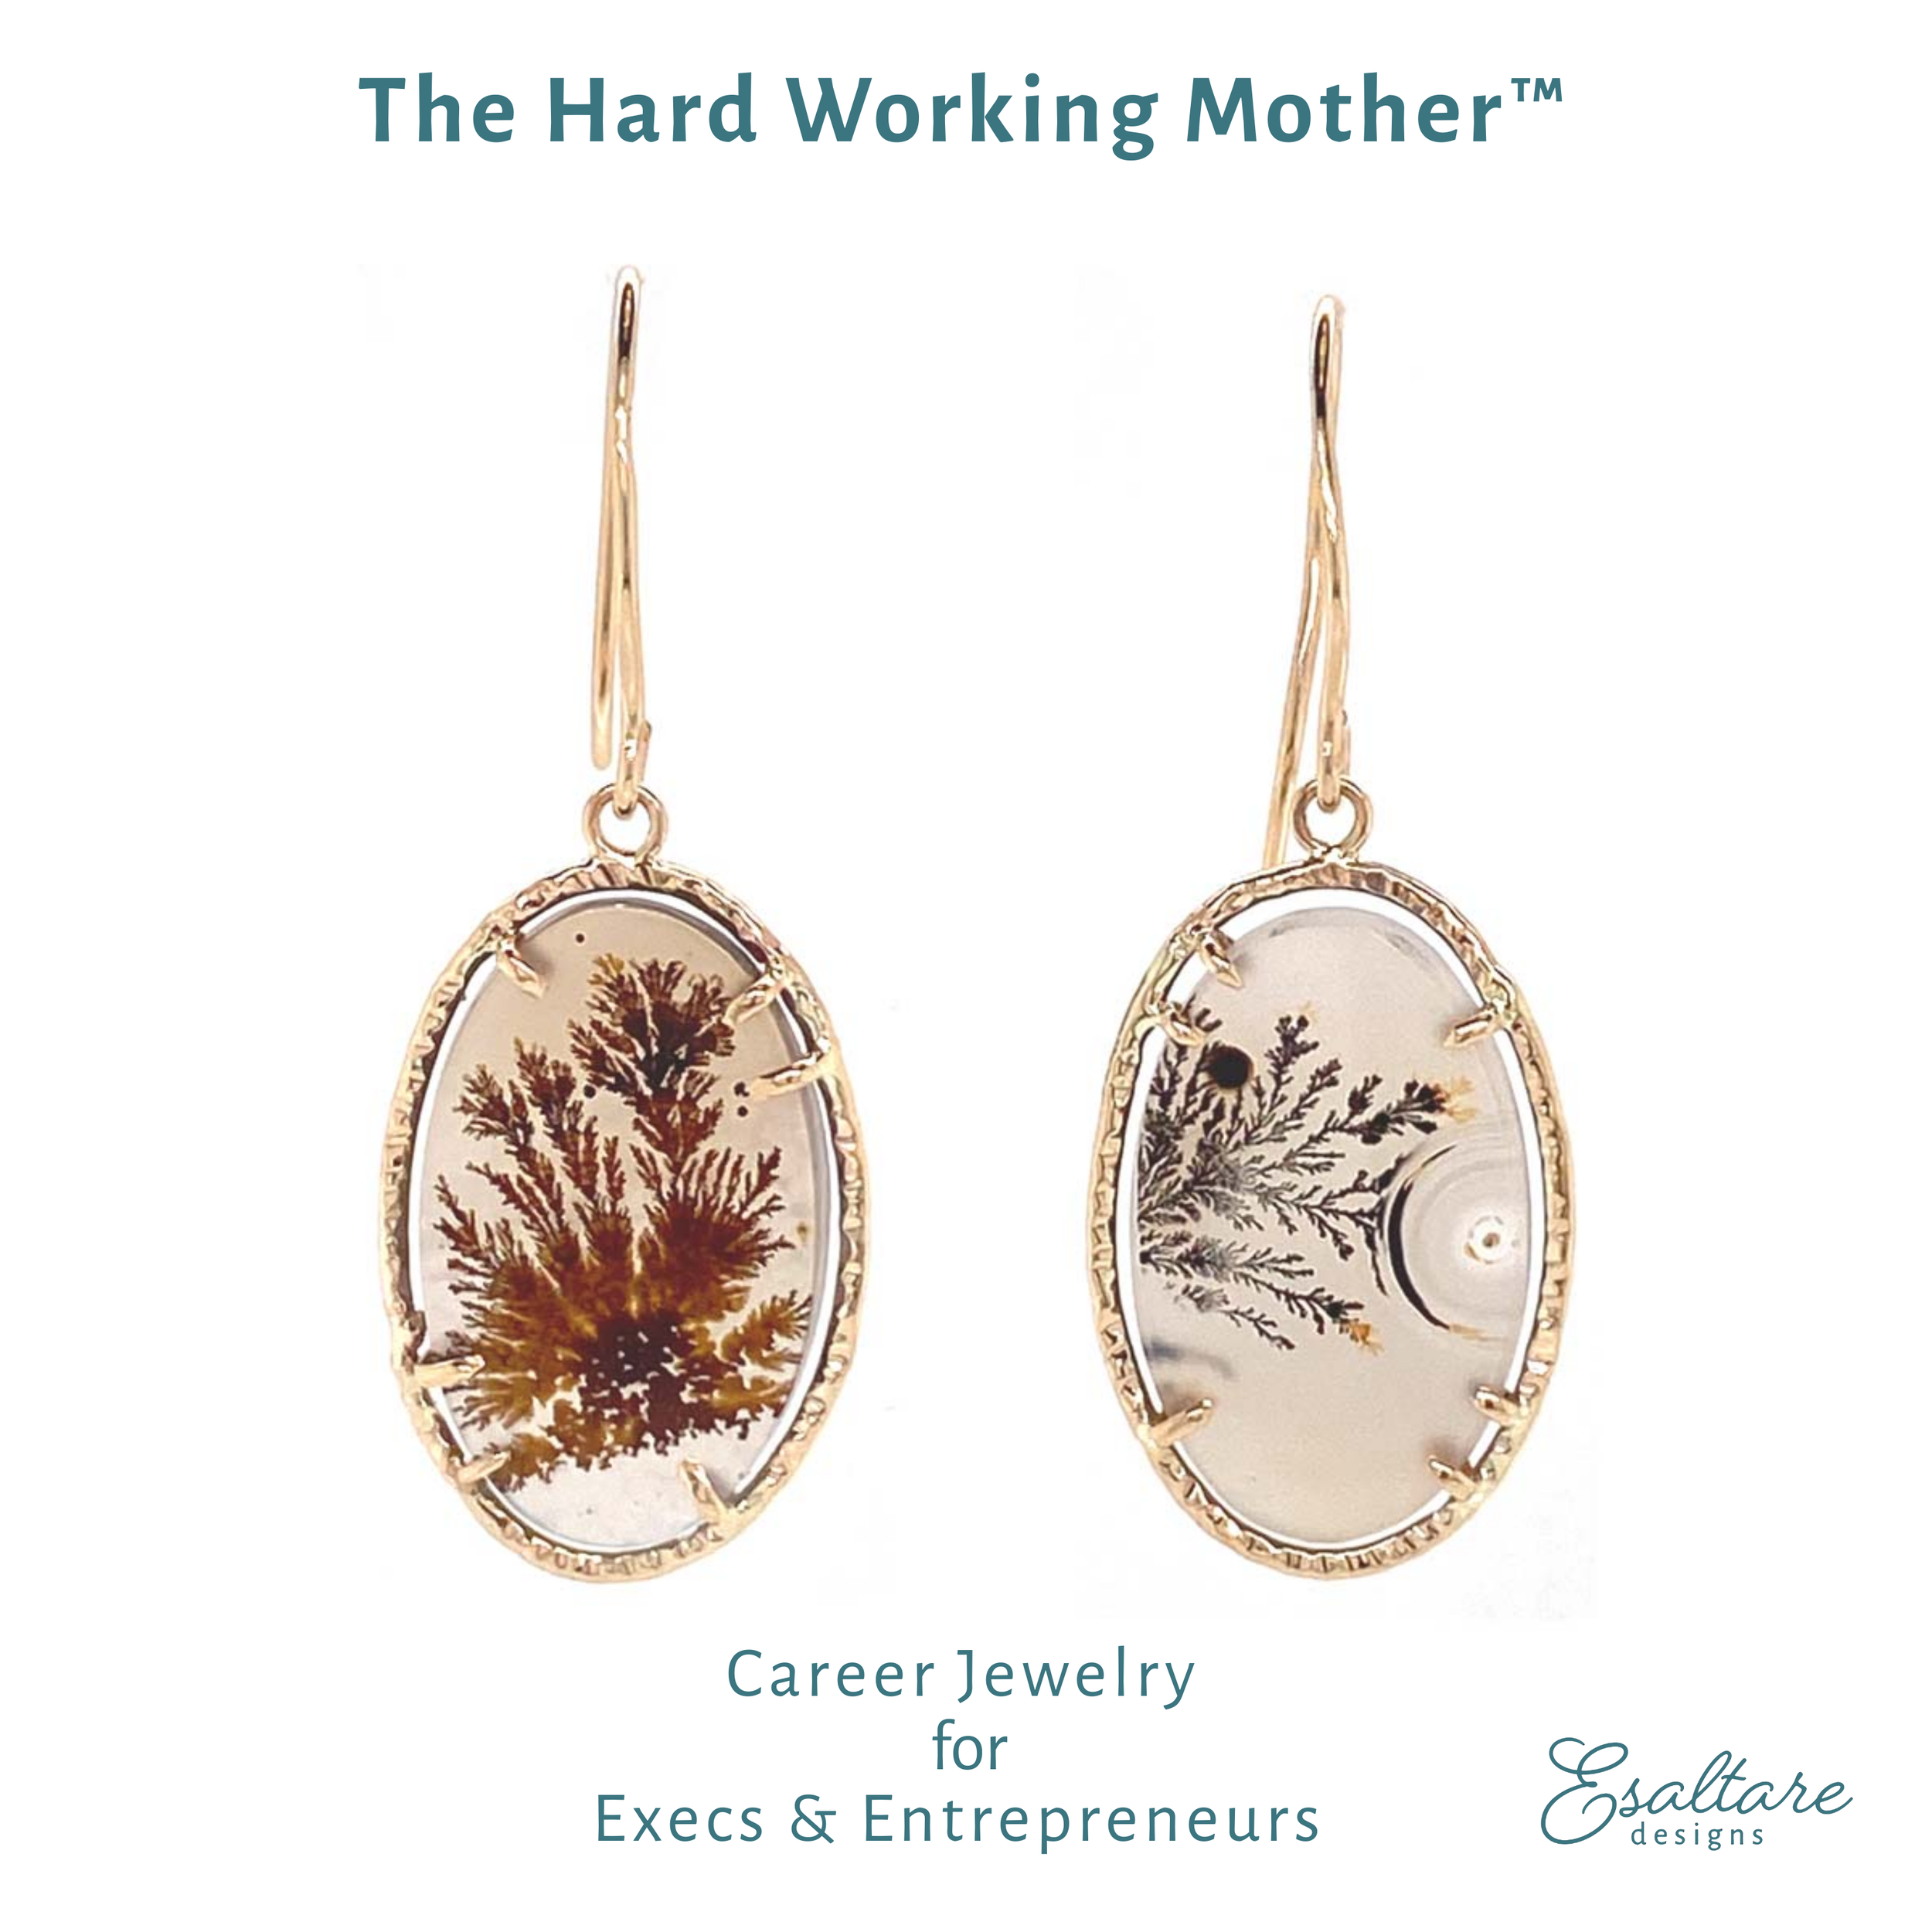 Share more than 161 gold earrings designs for mothers